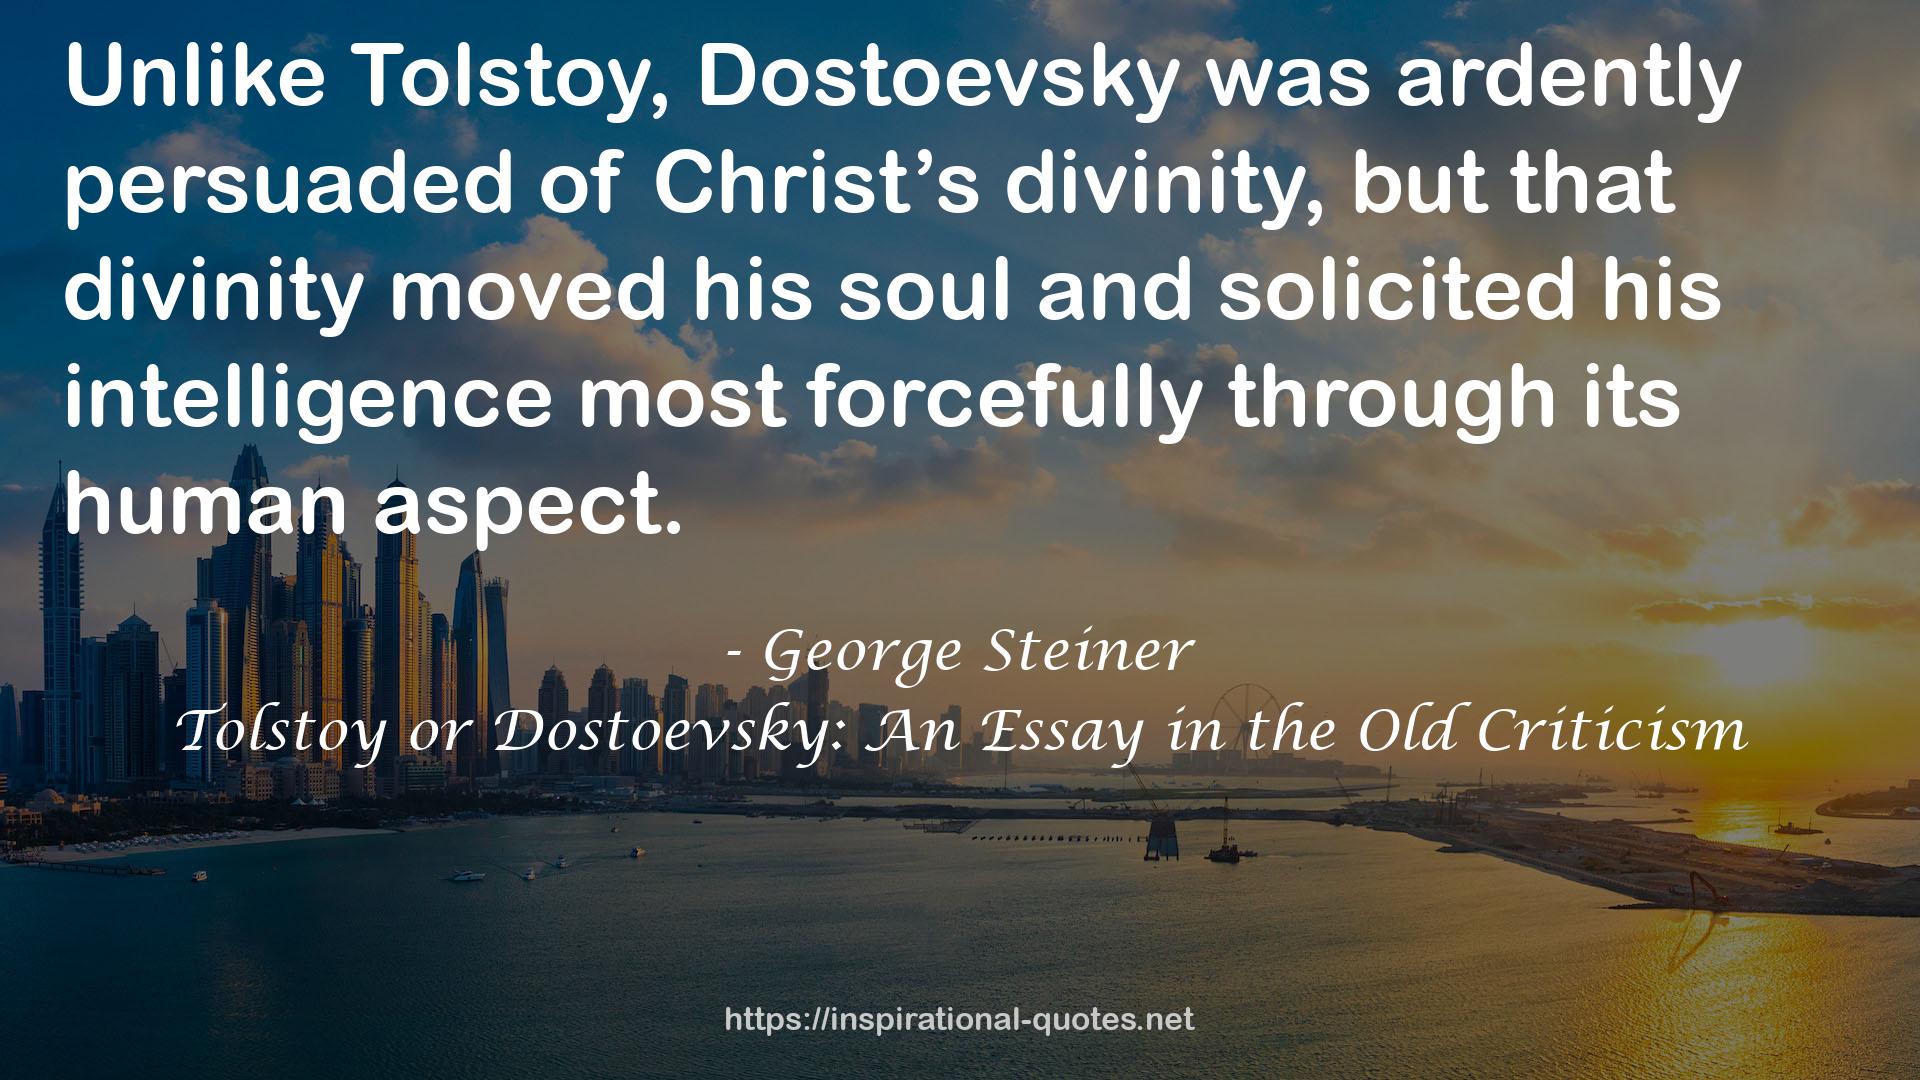 Tolstoy or Dostoevsky: An Essay in the Old Criticism QUOTES